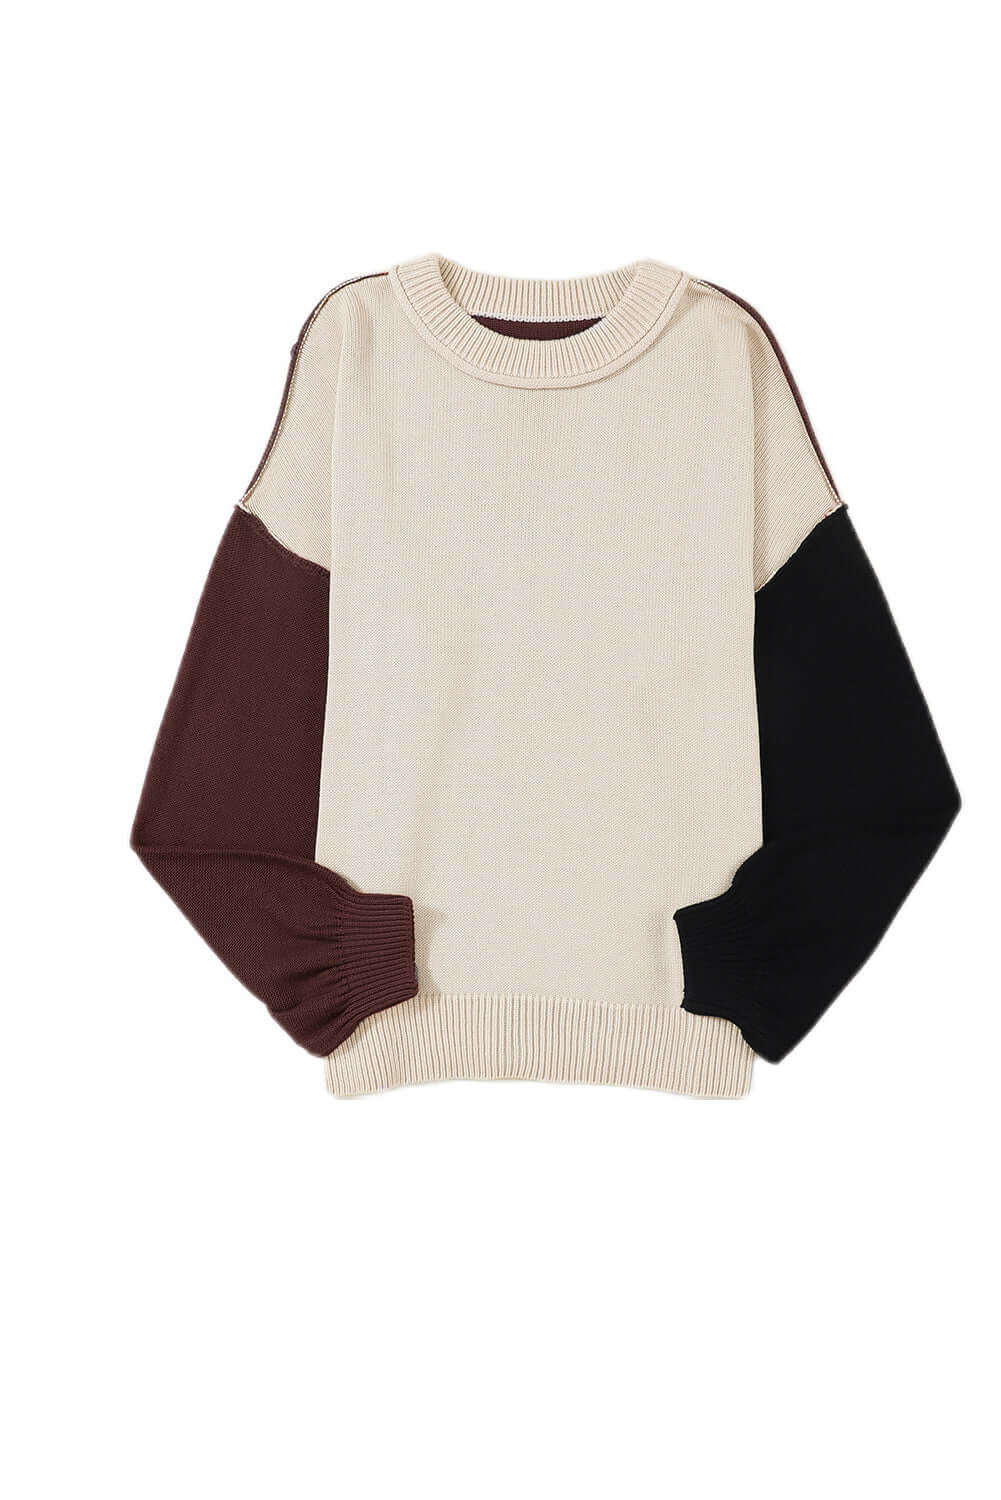 Coffee Colorblock Bishop Sleeve Ribbed Trim Sweater - Dixie Hike & Style